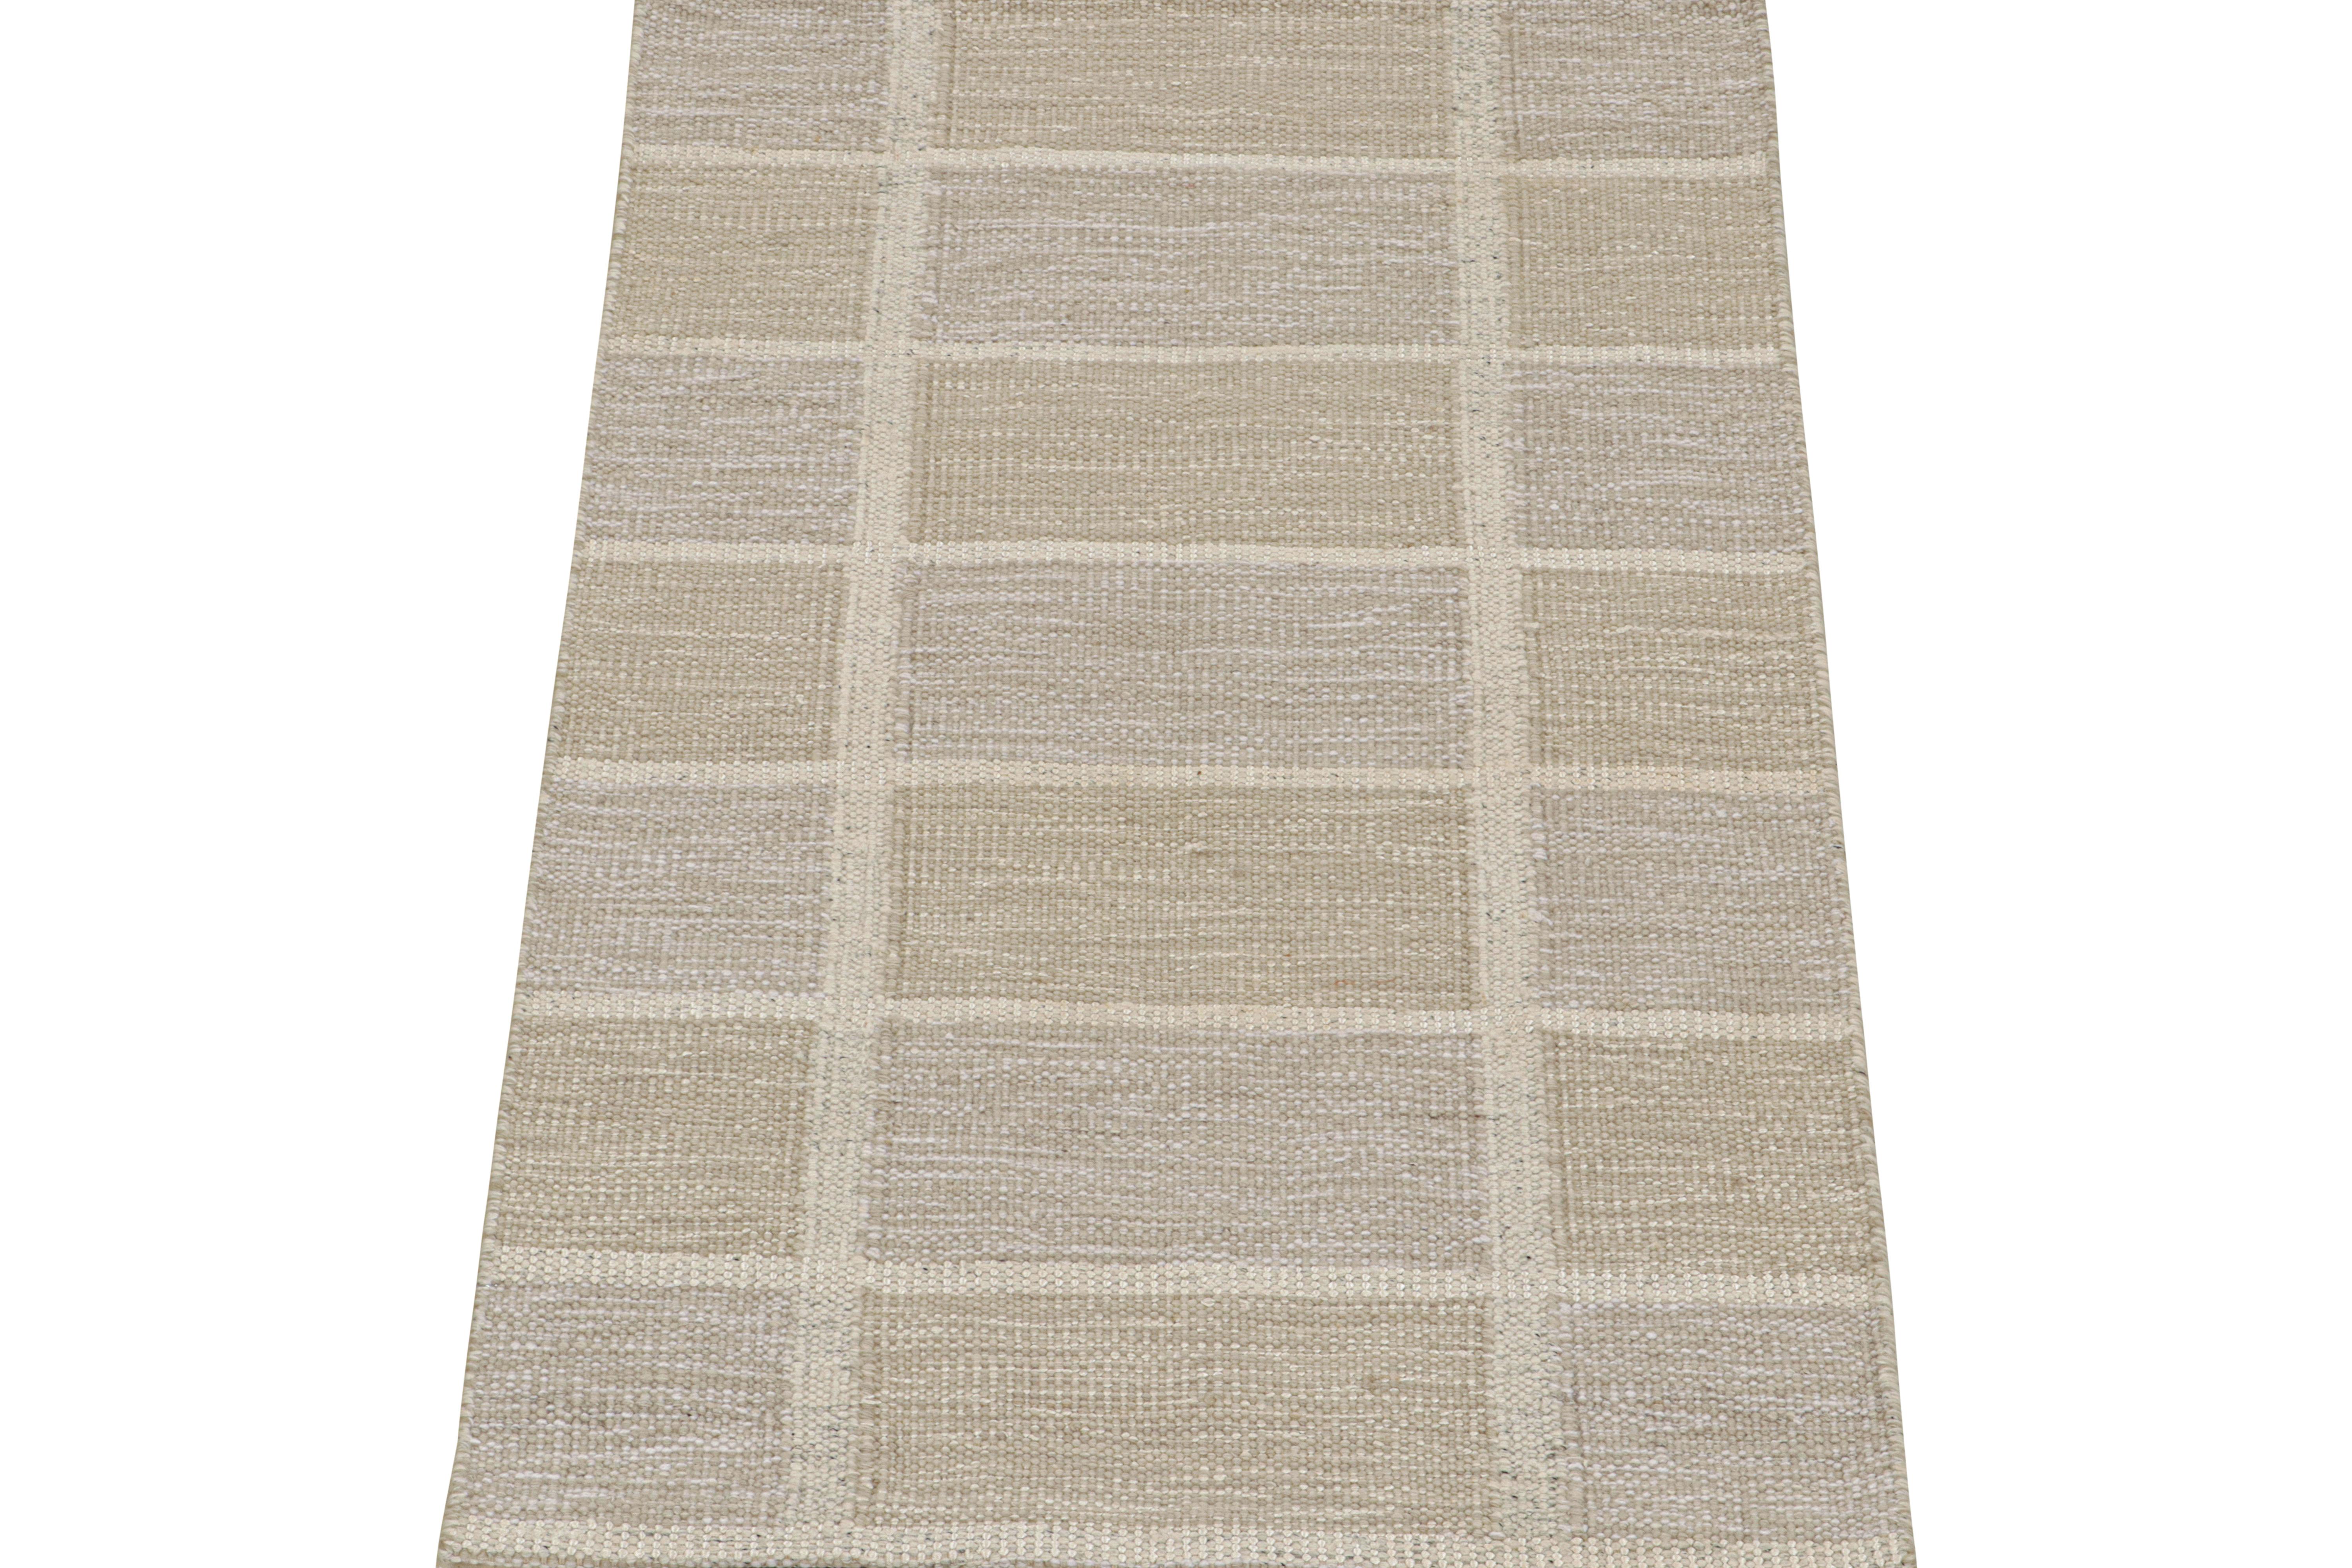 This 3x5 flat weave rug is a bold new addition to the Scandinavian Collection by Rug & Kilim. Handwoven in a strong semi-vested wool, its design reflects a contemporary take on mid-century Rollakans and Swedish Deco style.

On the Design:

This